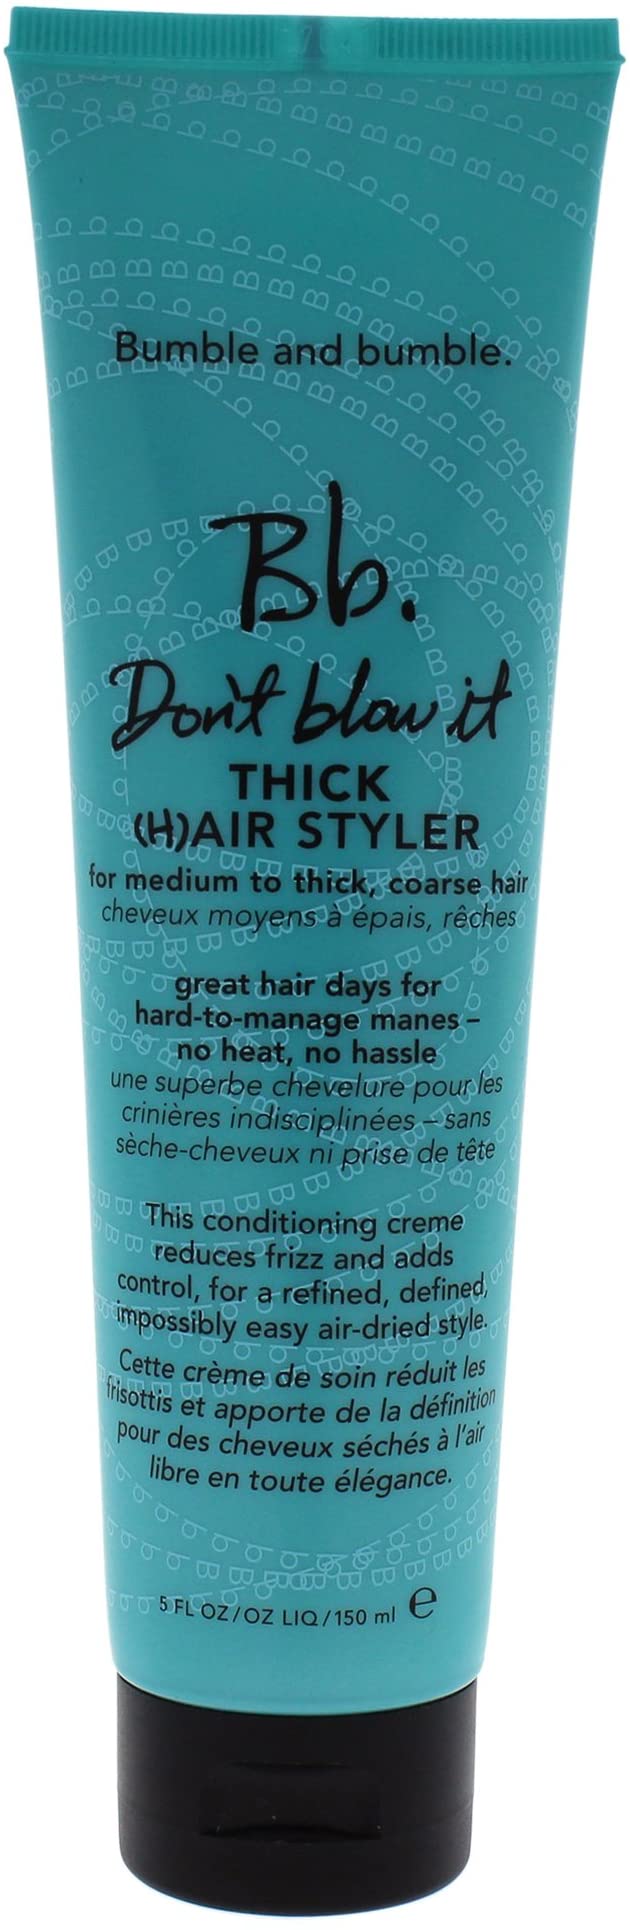 Cremes by Bumble and bumble Don't Blow It Hair Styler for Thick Hair 150ml